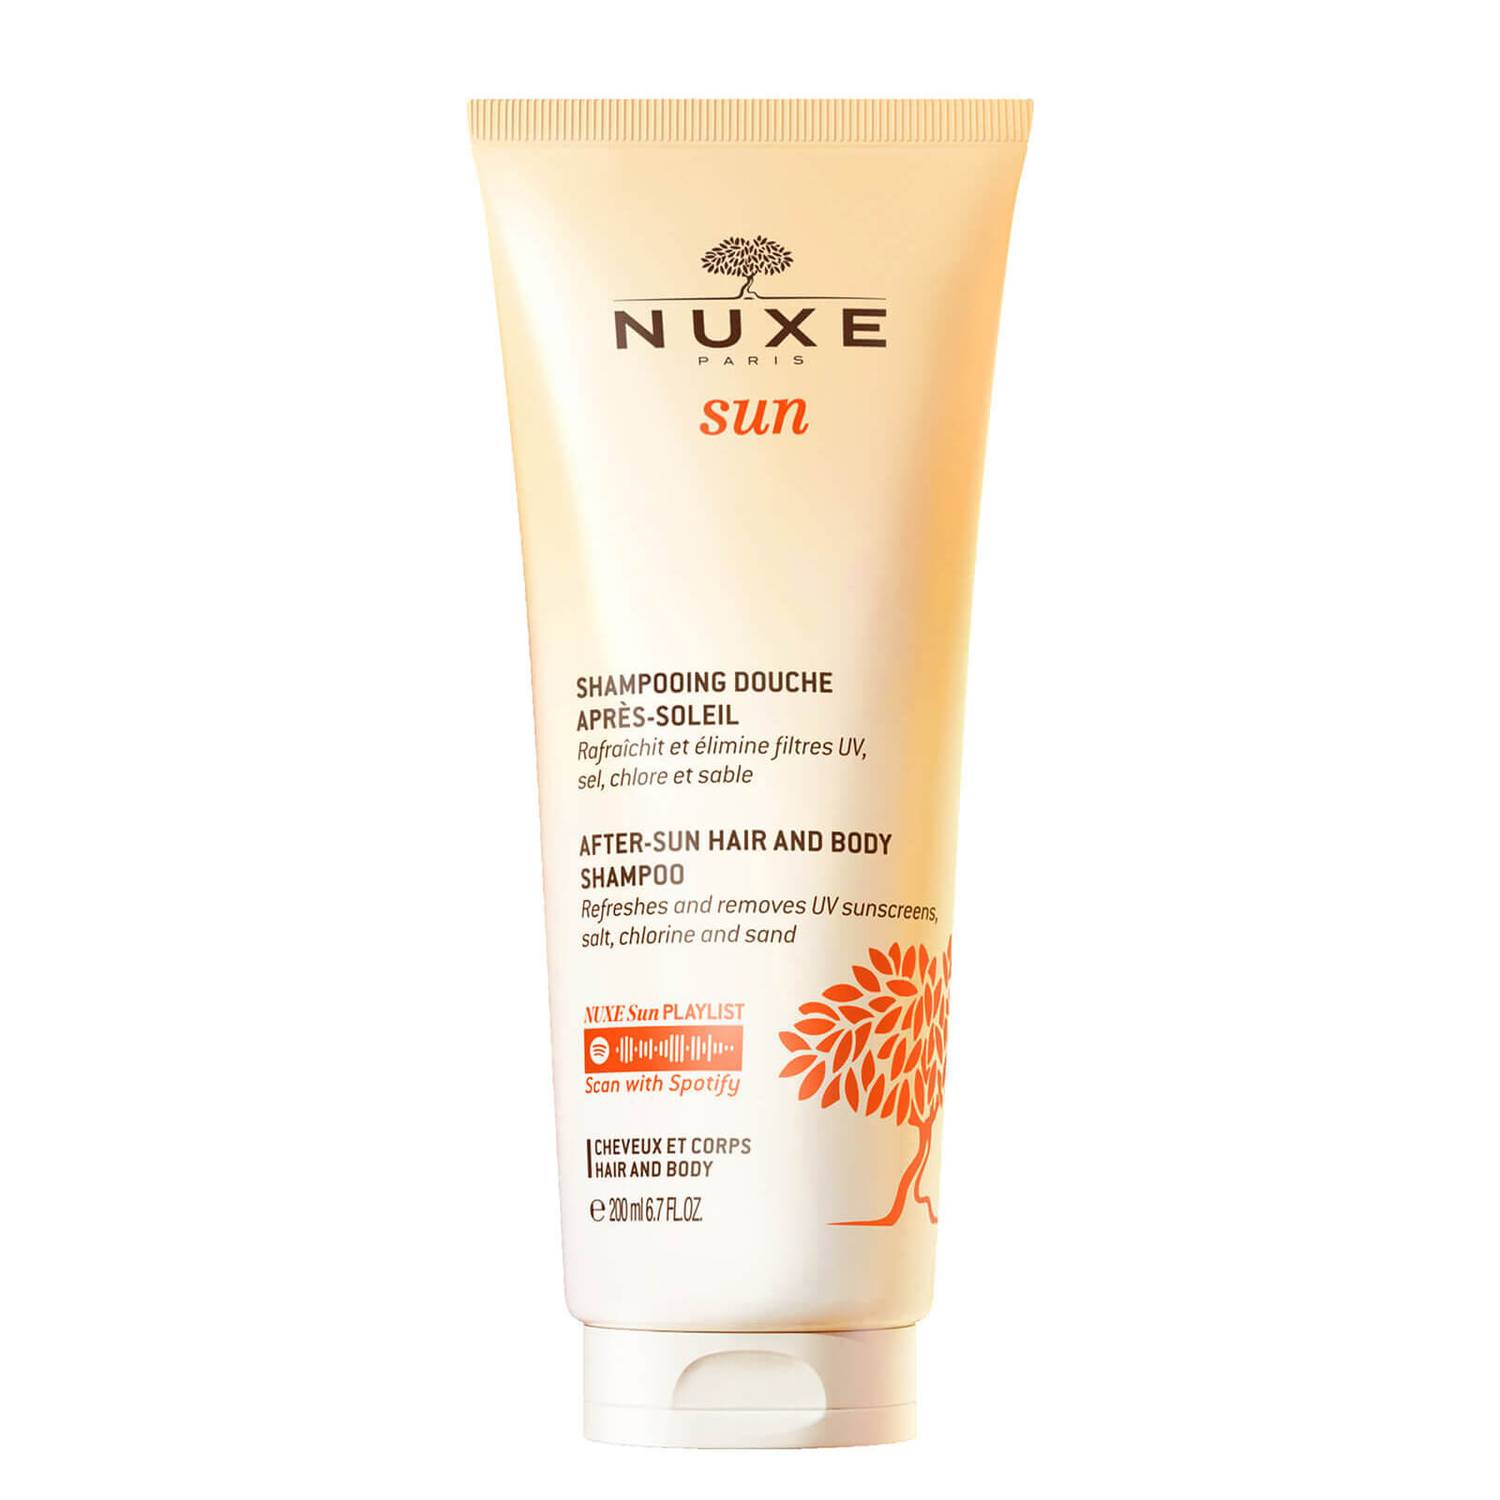 Nuxe Sun - After-Sun Hair and Body Shampoo refreshes and removes UV sunscreens, salt, chlorine and sand.